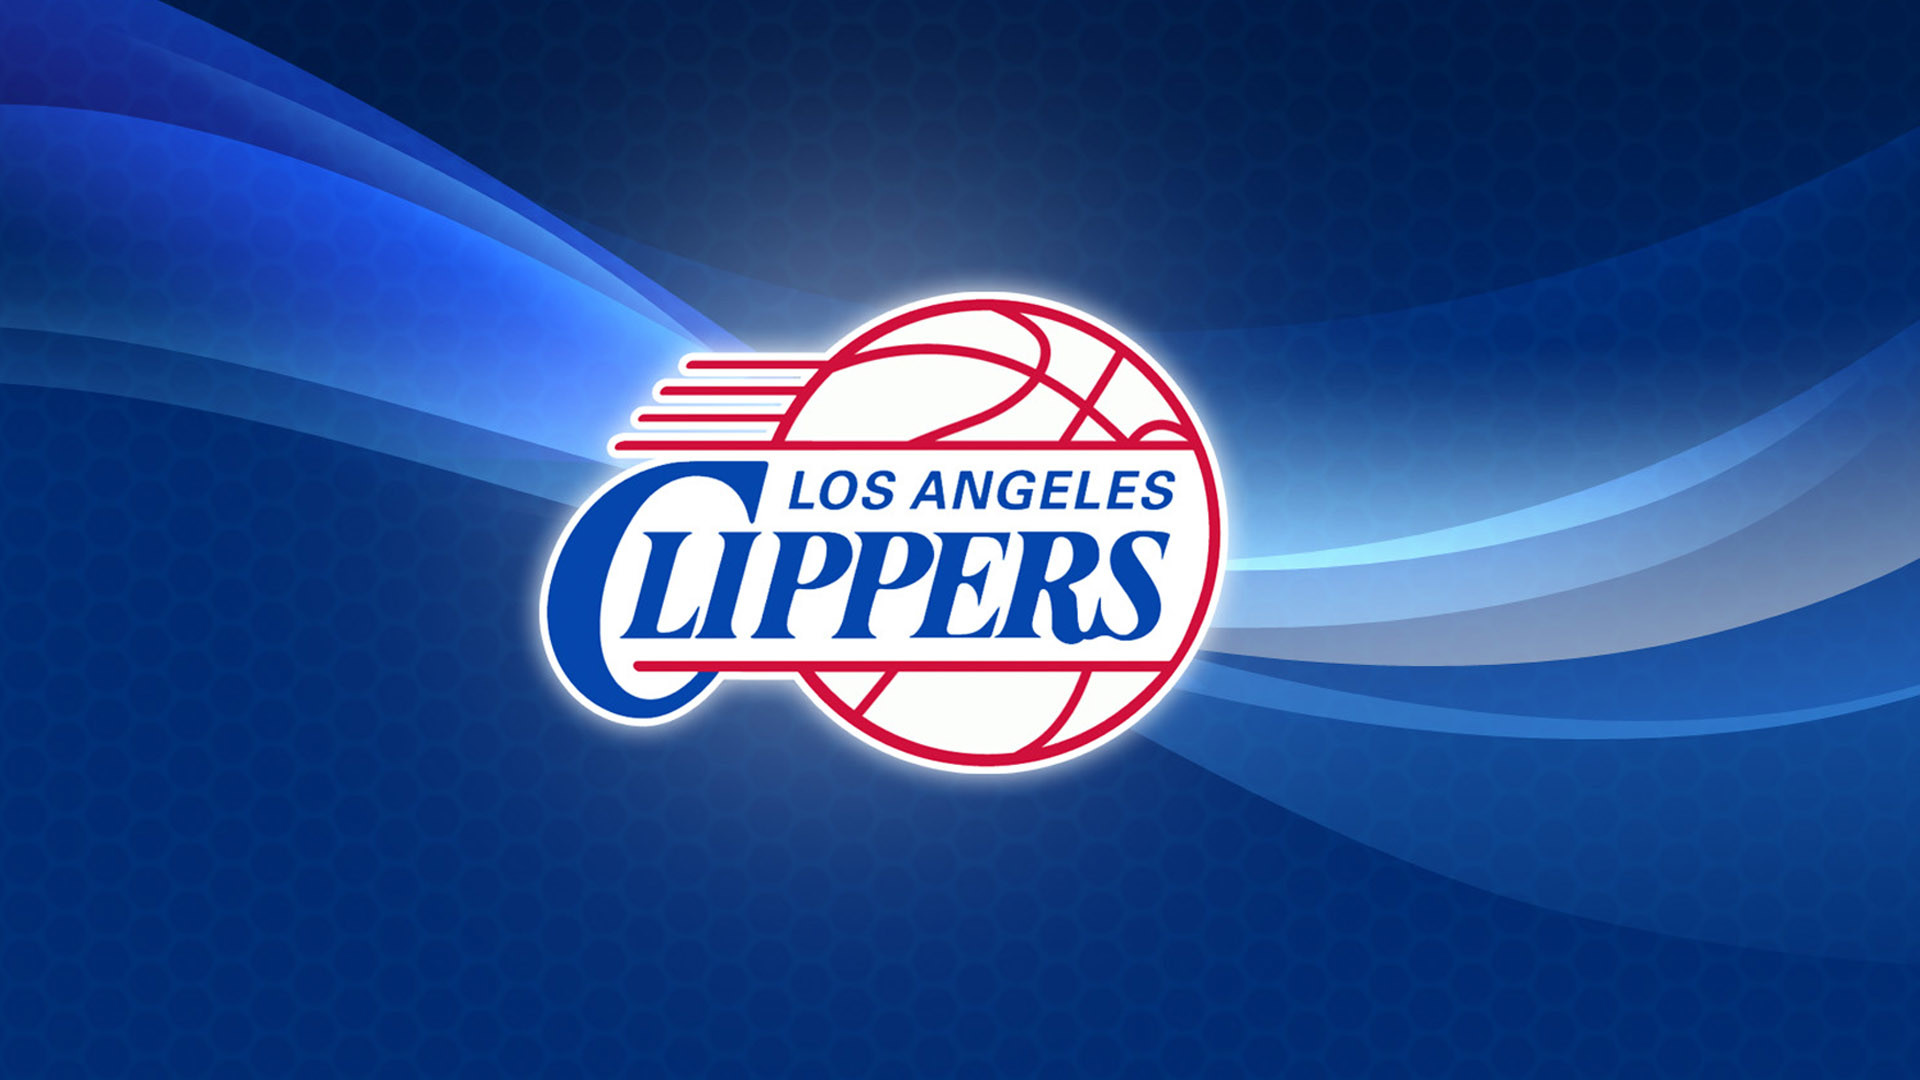 1920x1080 Los Angeles Clippers wallpaper download #372